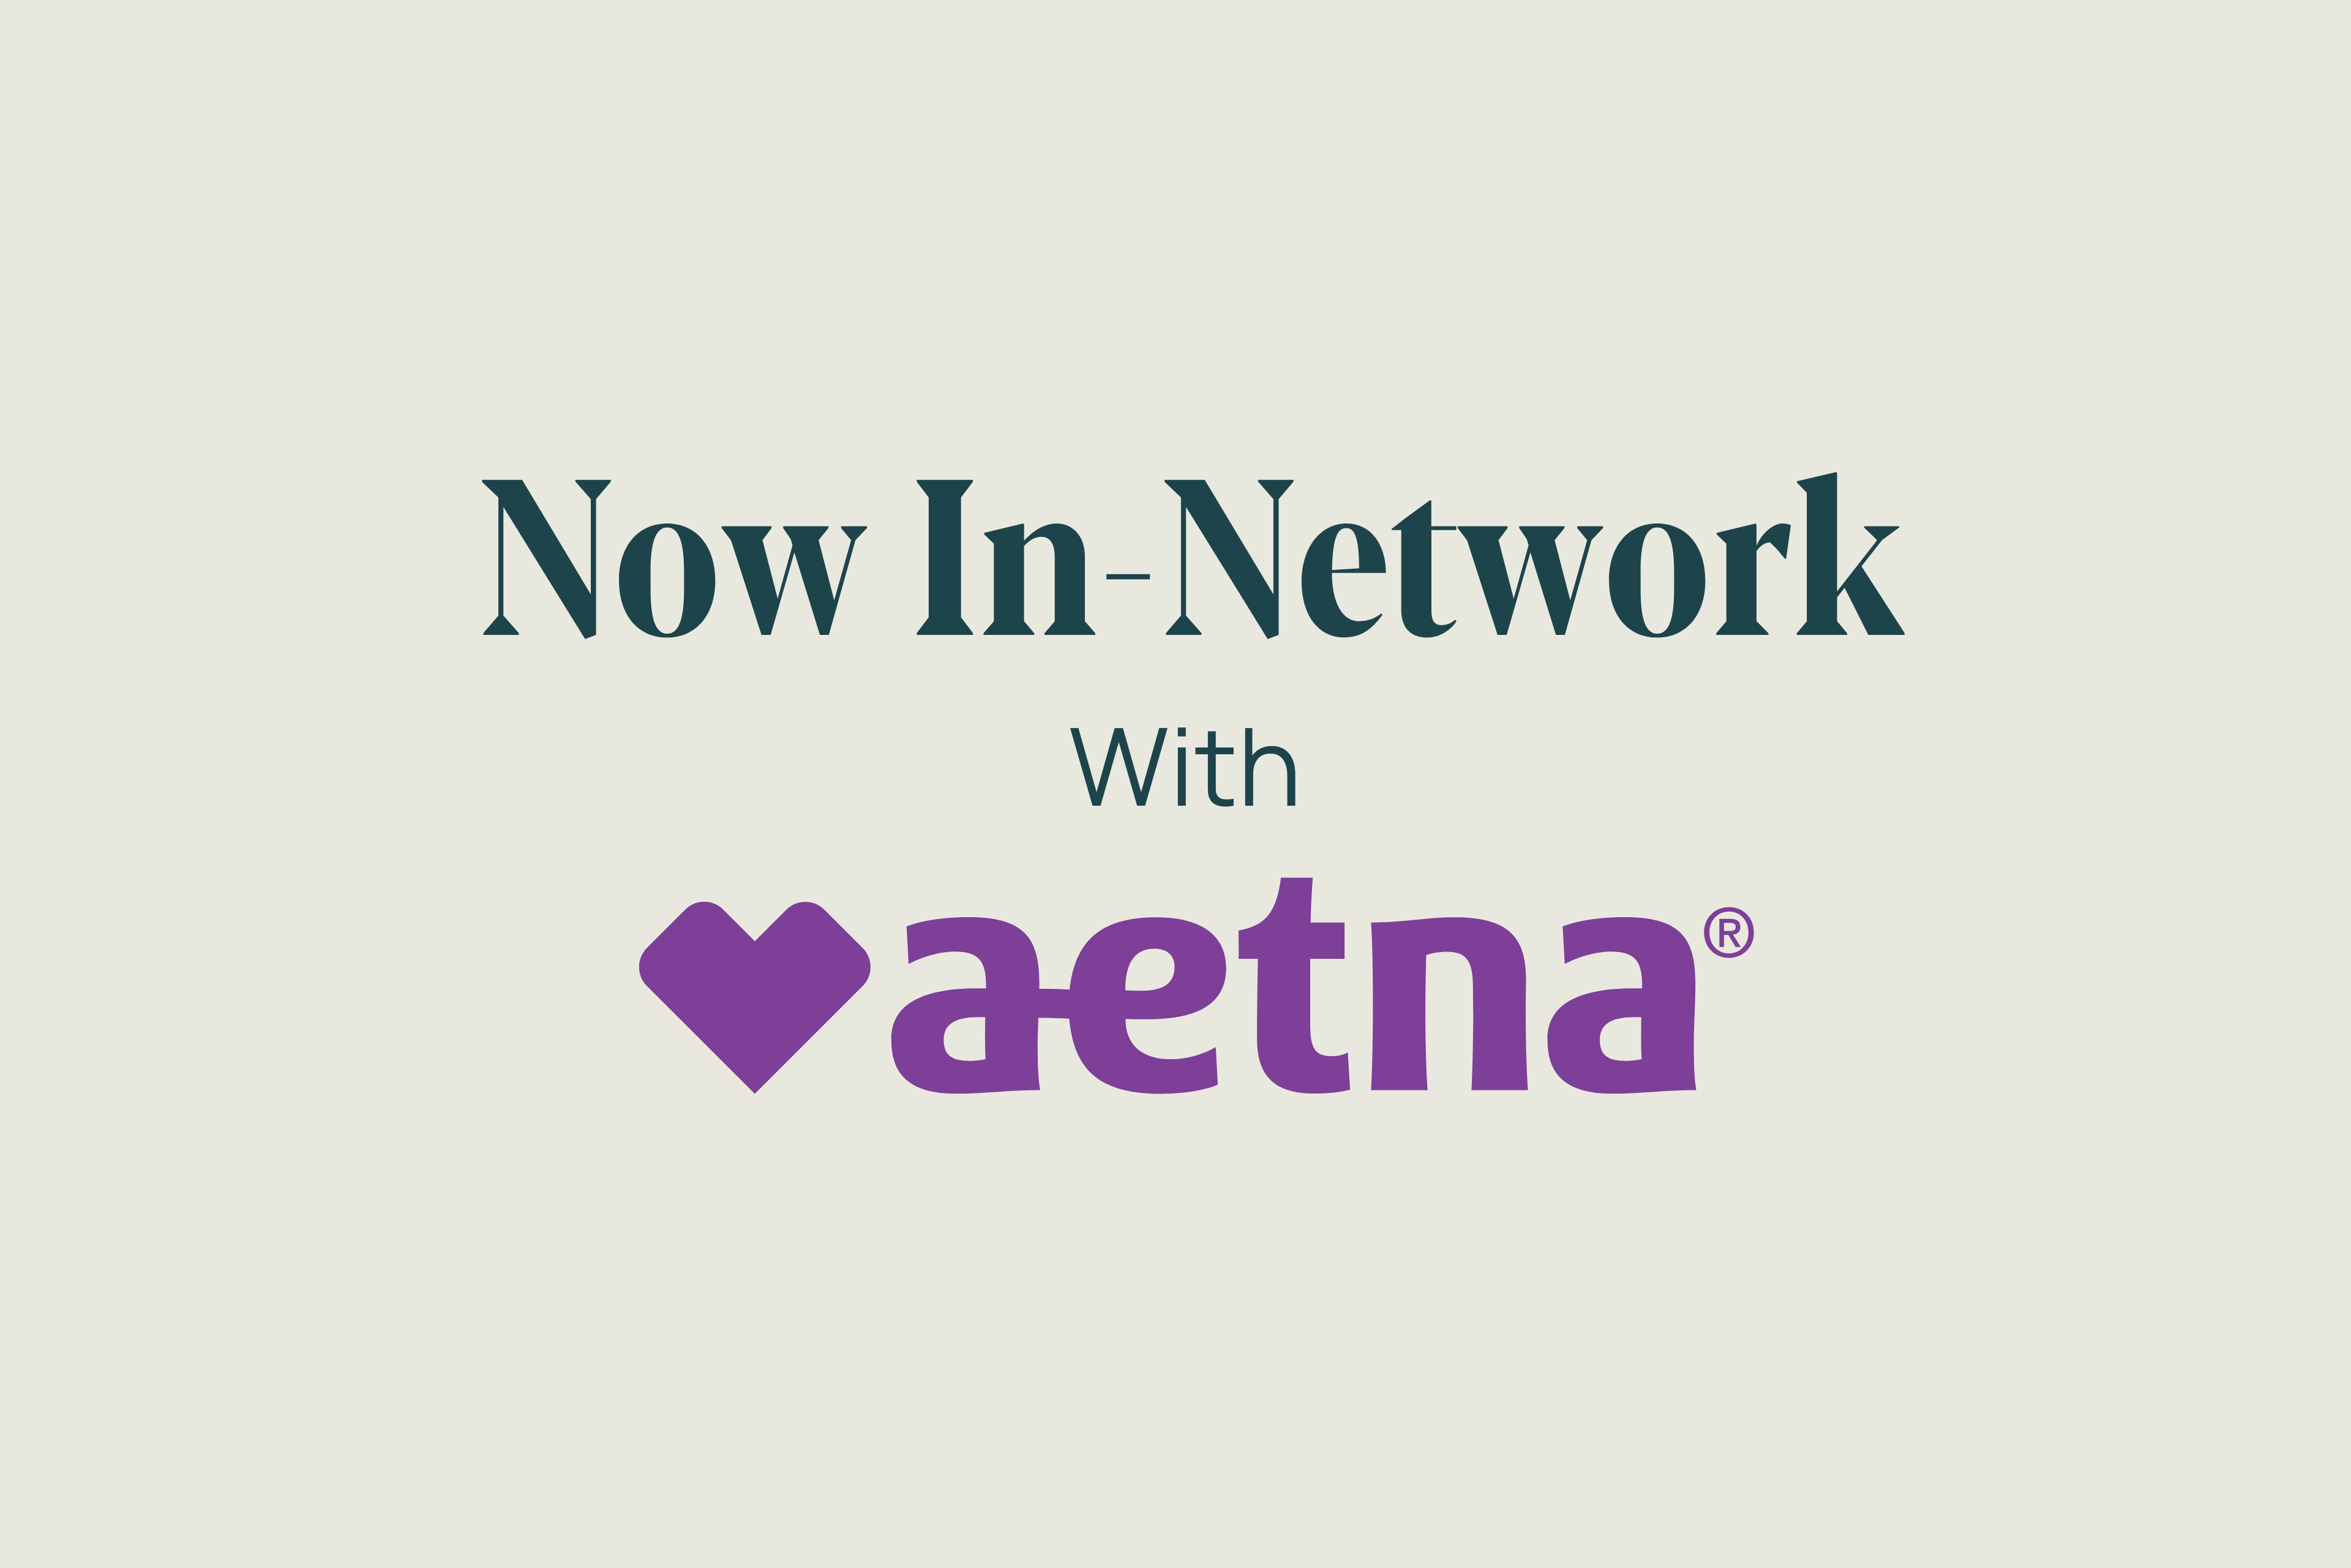 Koru Spring now in-network with Aetna